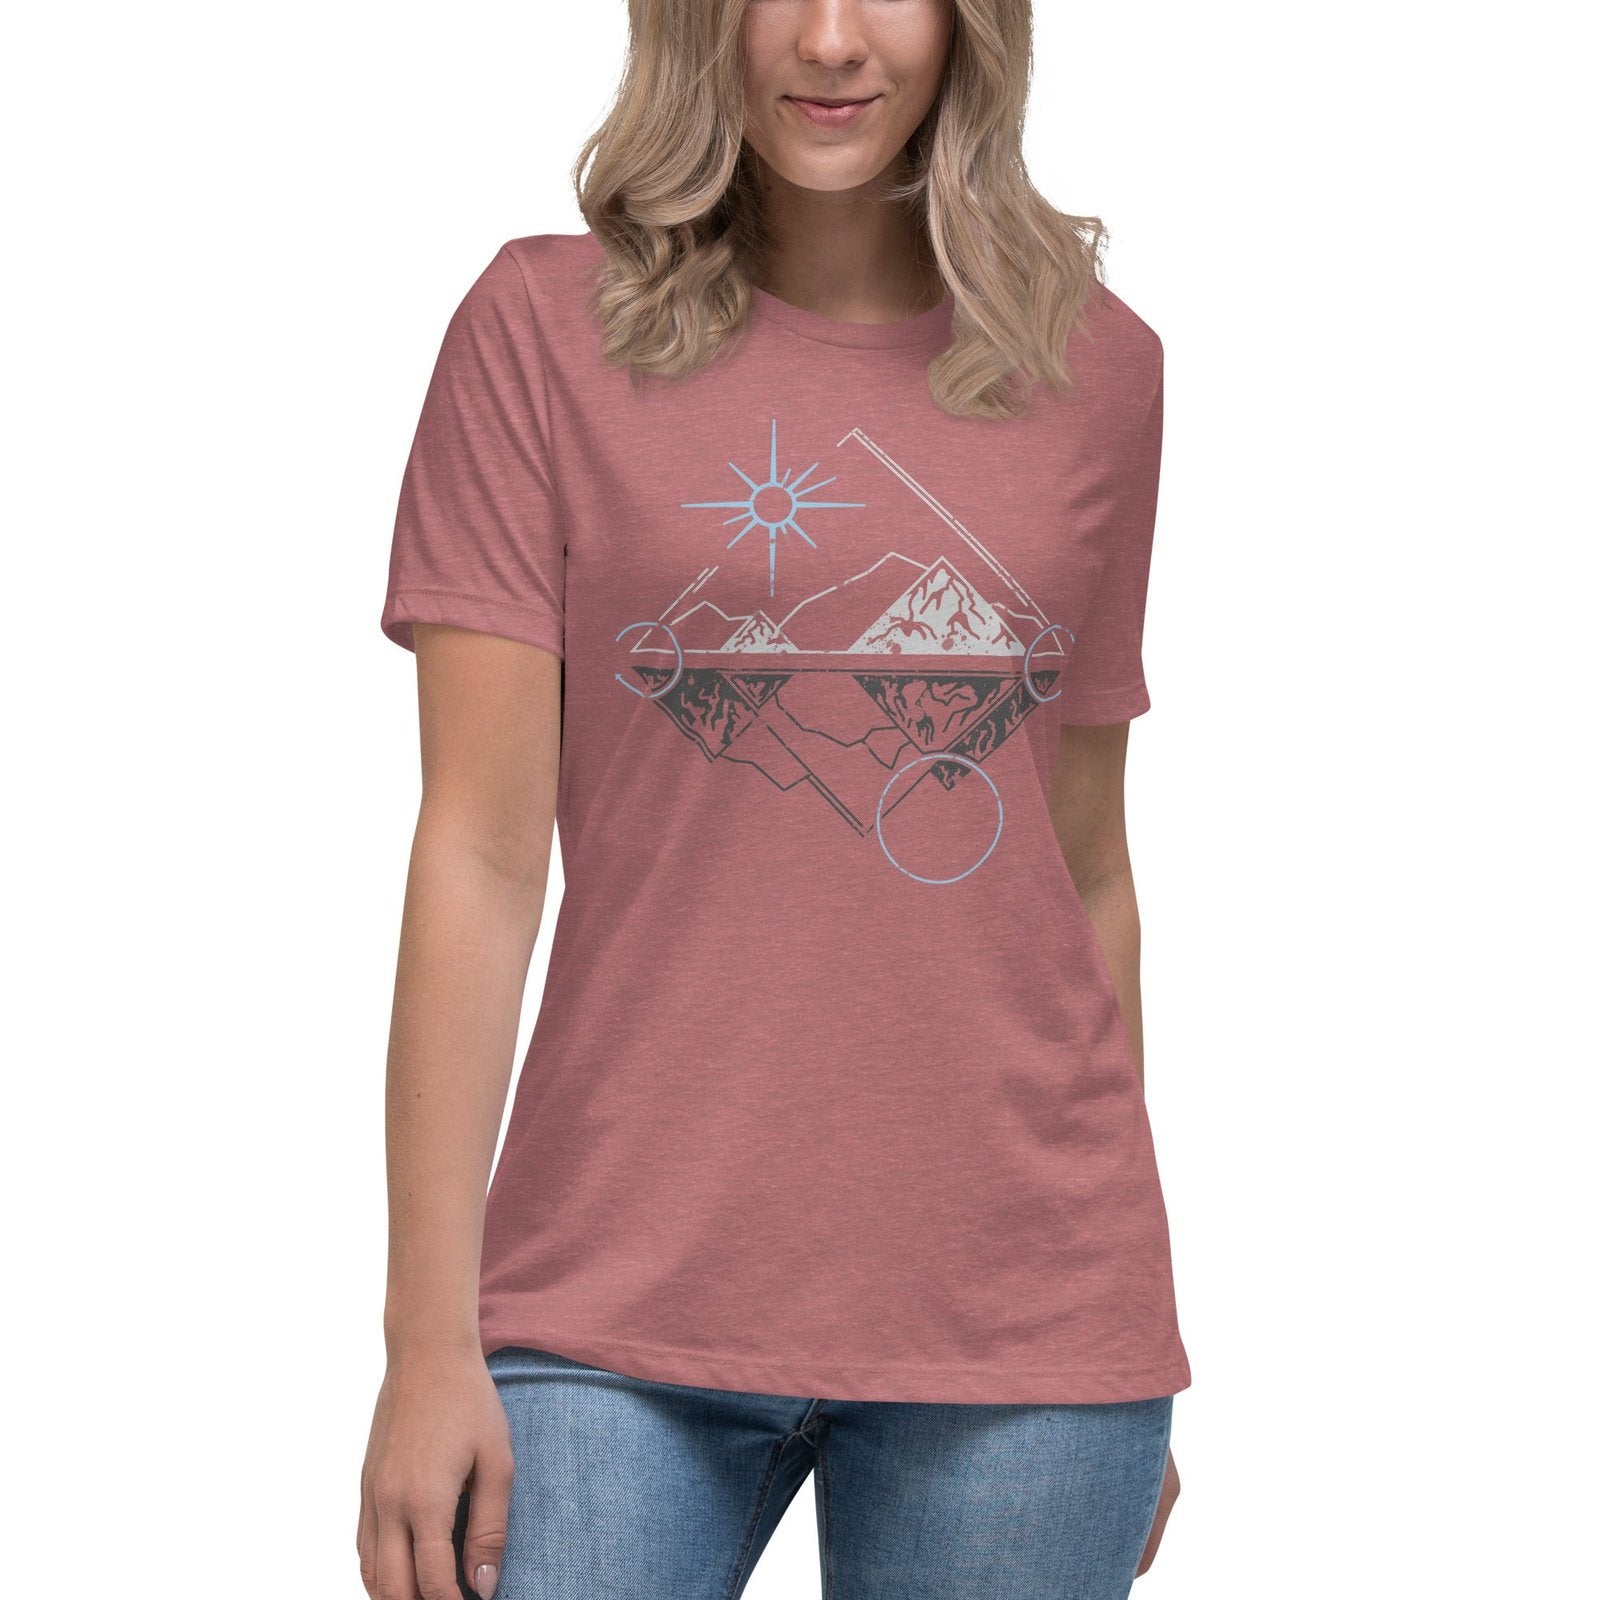 Geometric Sun and Moon Over Mountains Women's Relaxed T-Shirt